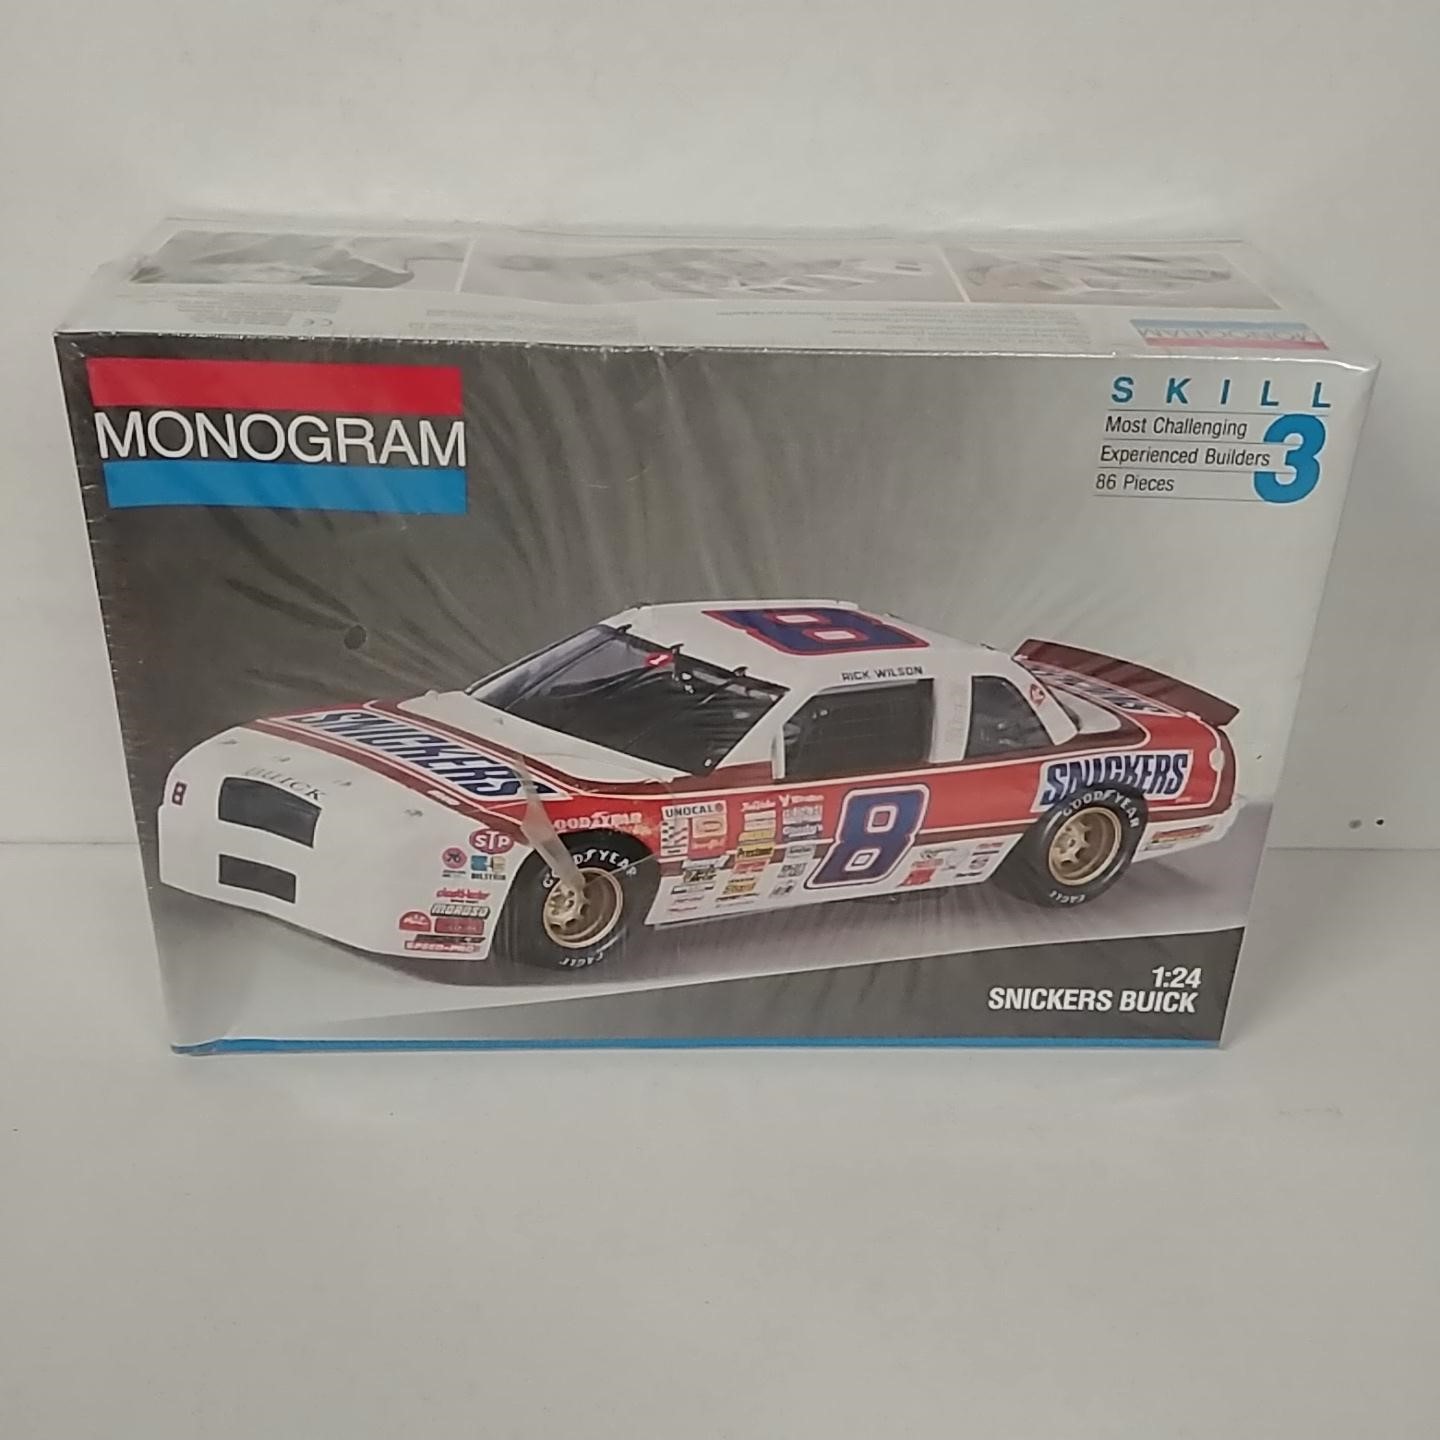 1991 Rick Wilson 1/24th Snickers Buick model kit by Monogram